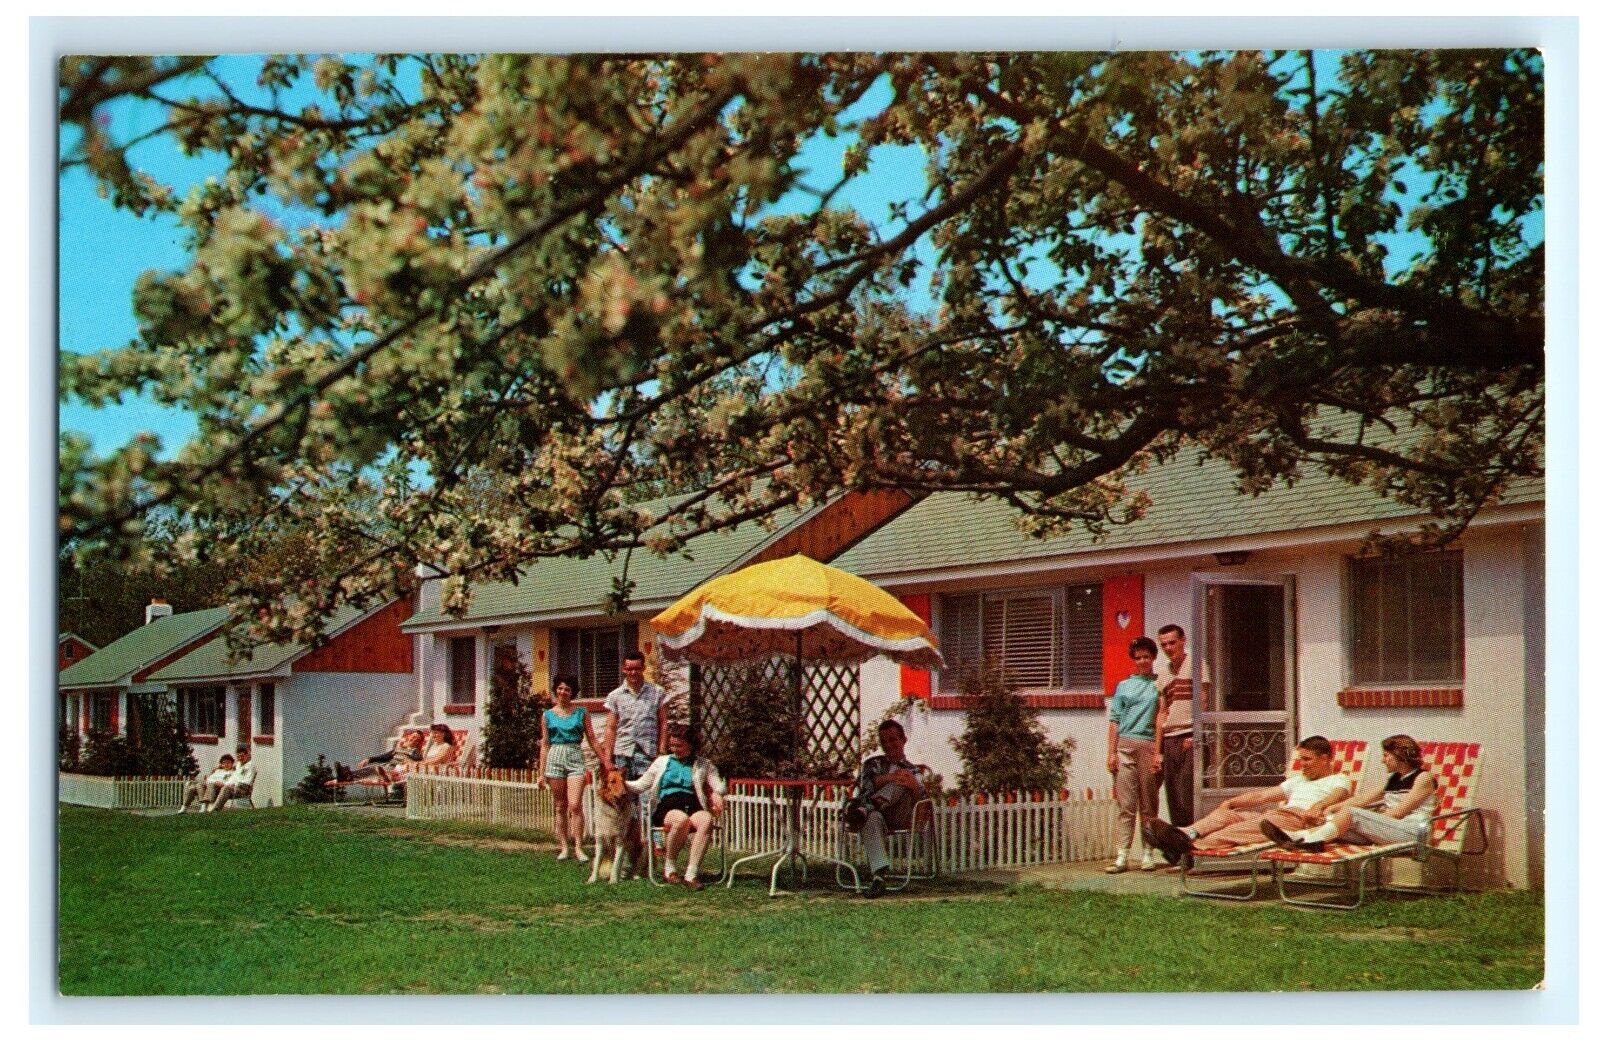 Chestnut Grove Lodge Cottages Swiftwater PA Pennsylvania Postcard (CF3)